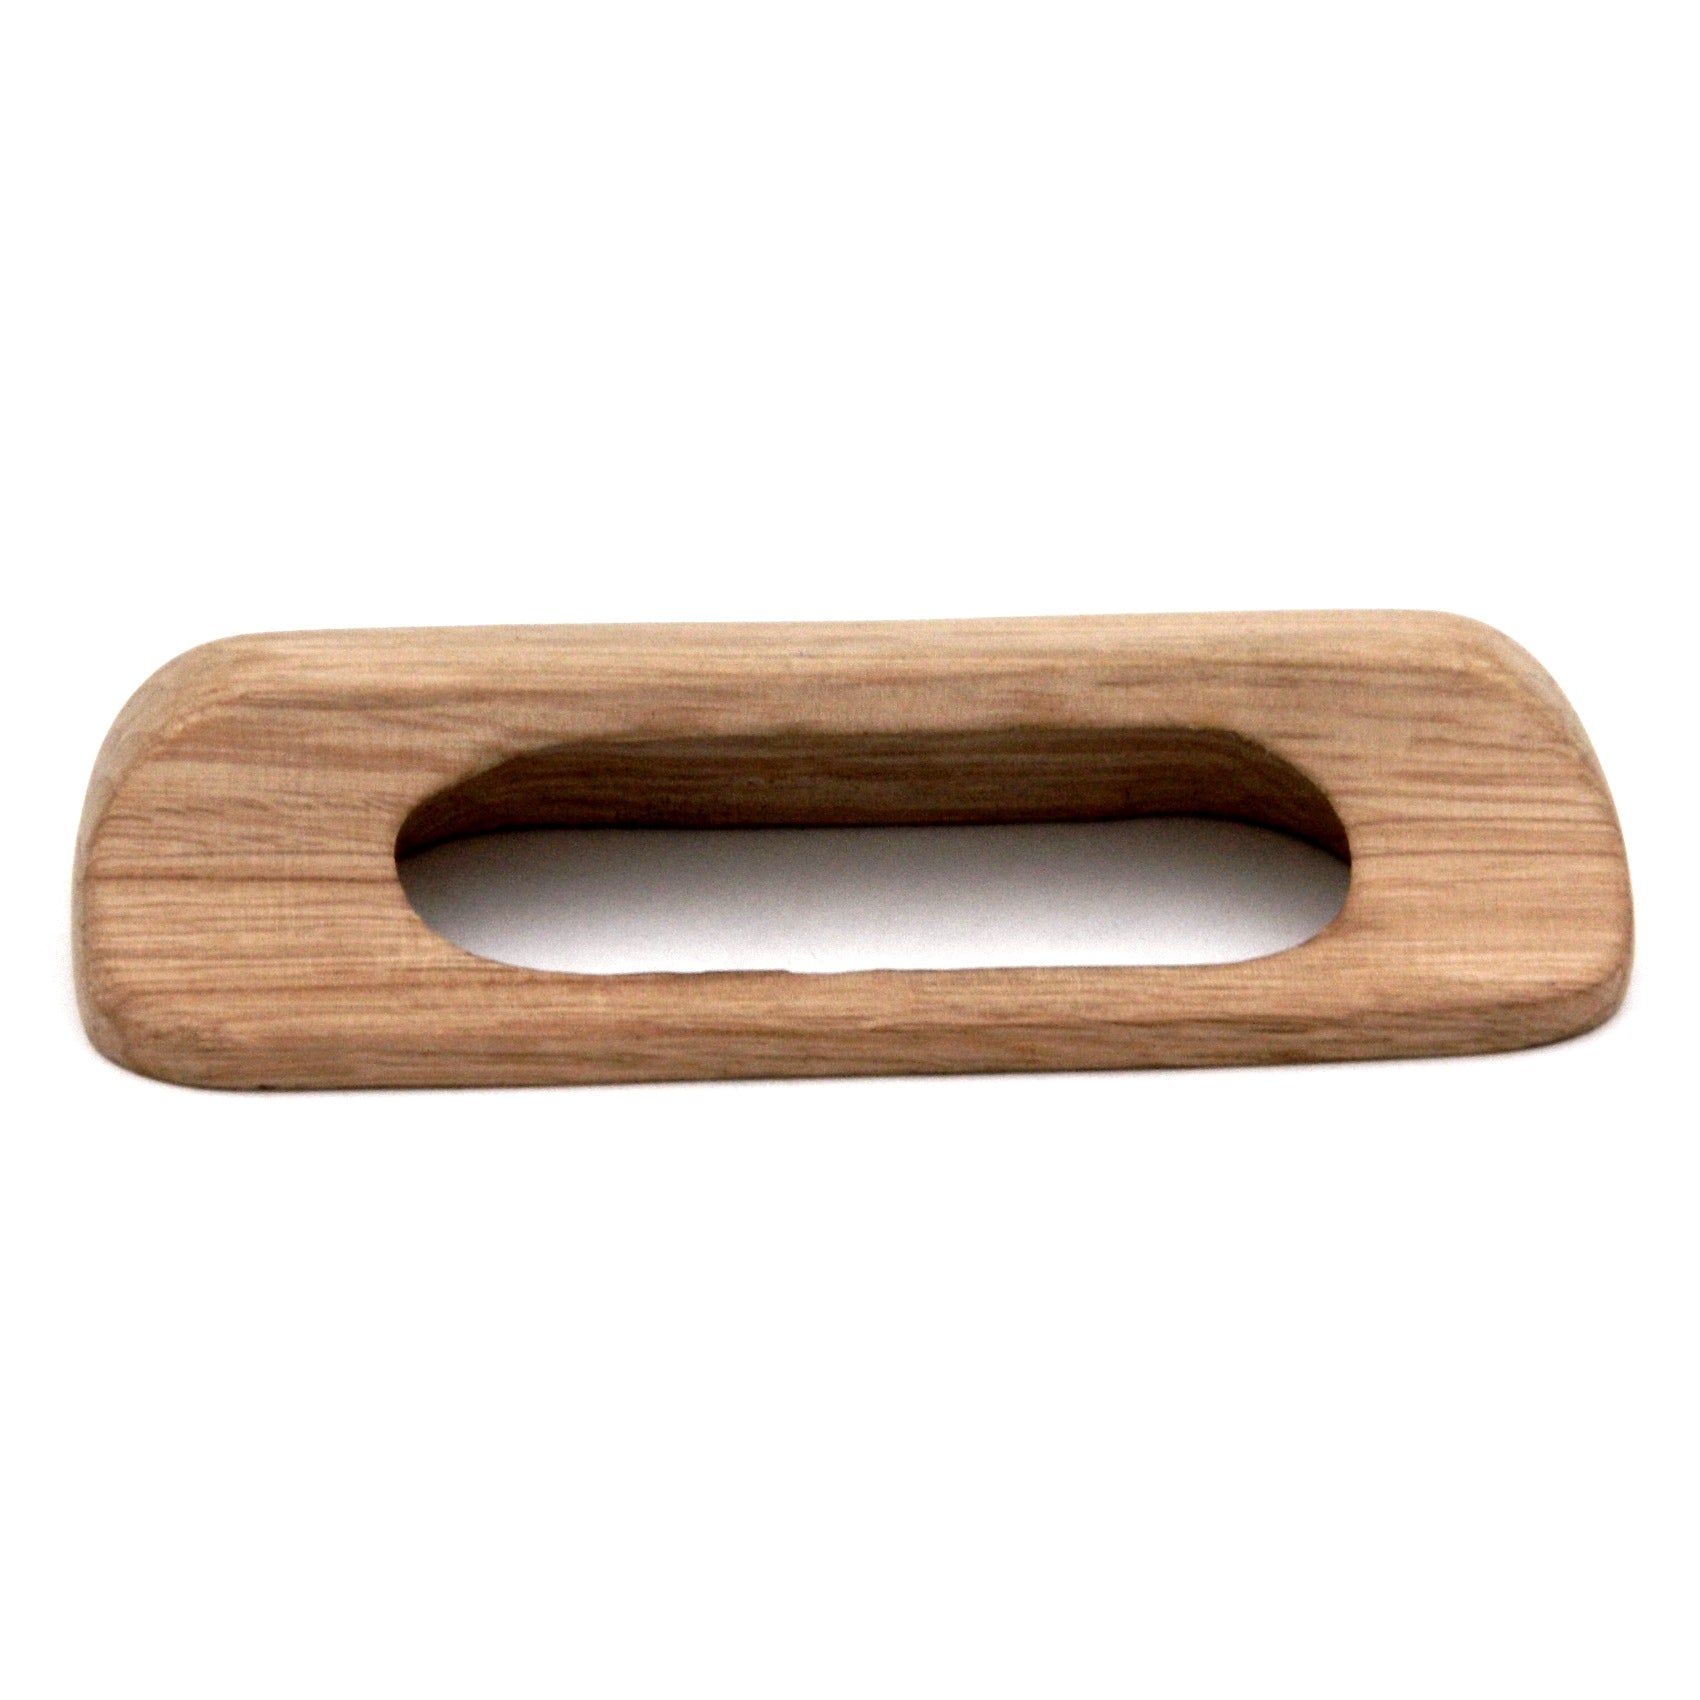 Hickory Hardware Unfinished Wood Cabinet or Furniture Drawer <br>3 3/4" (96mm)cc Cup Pull P676-UW